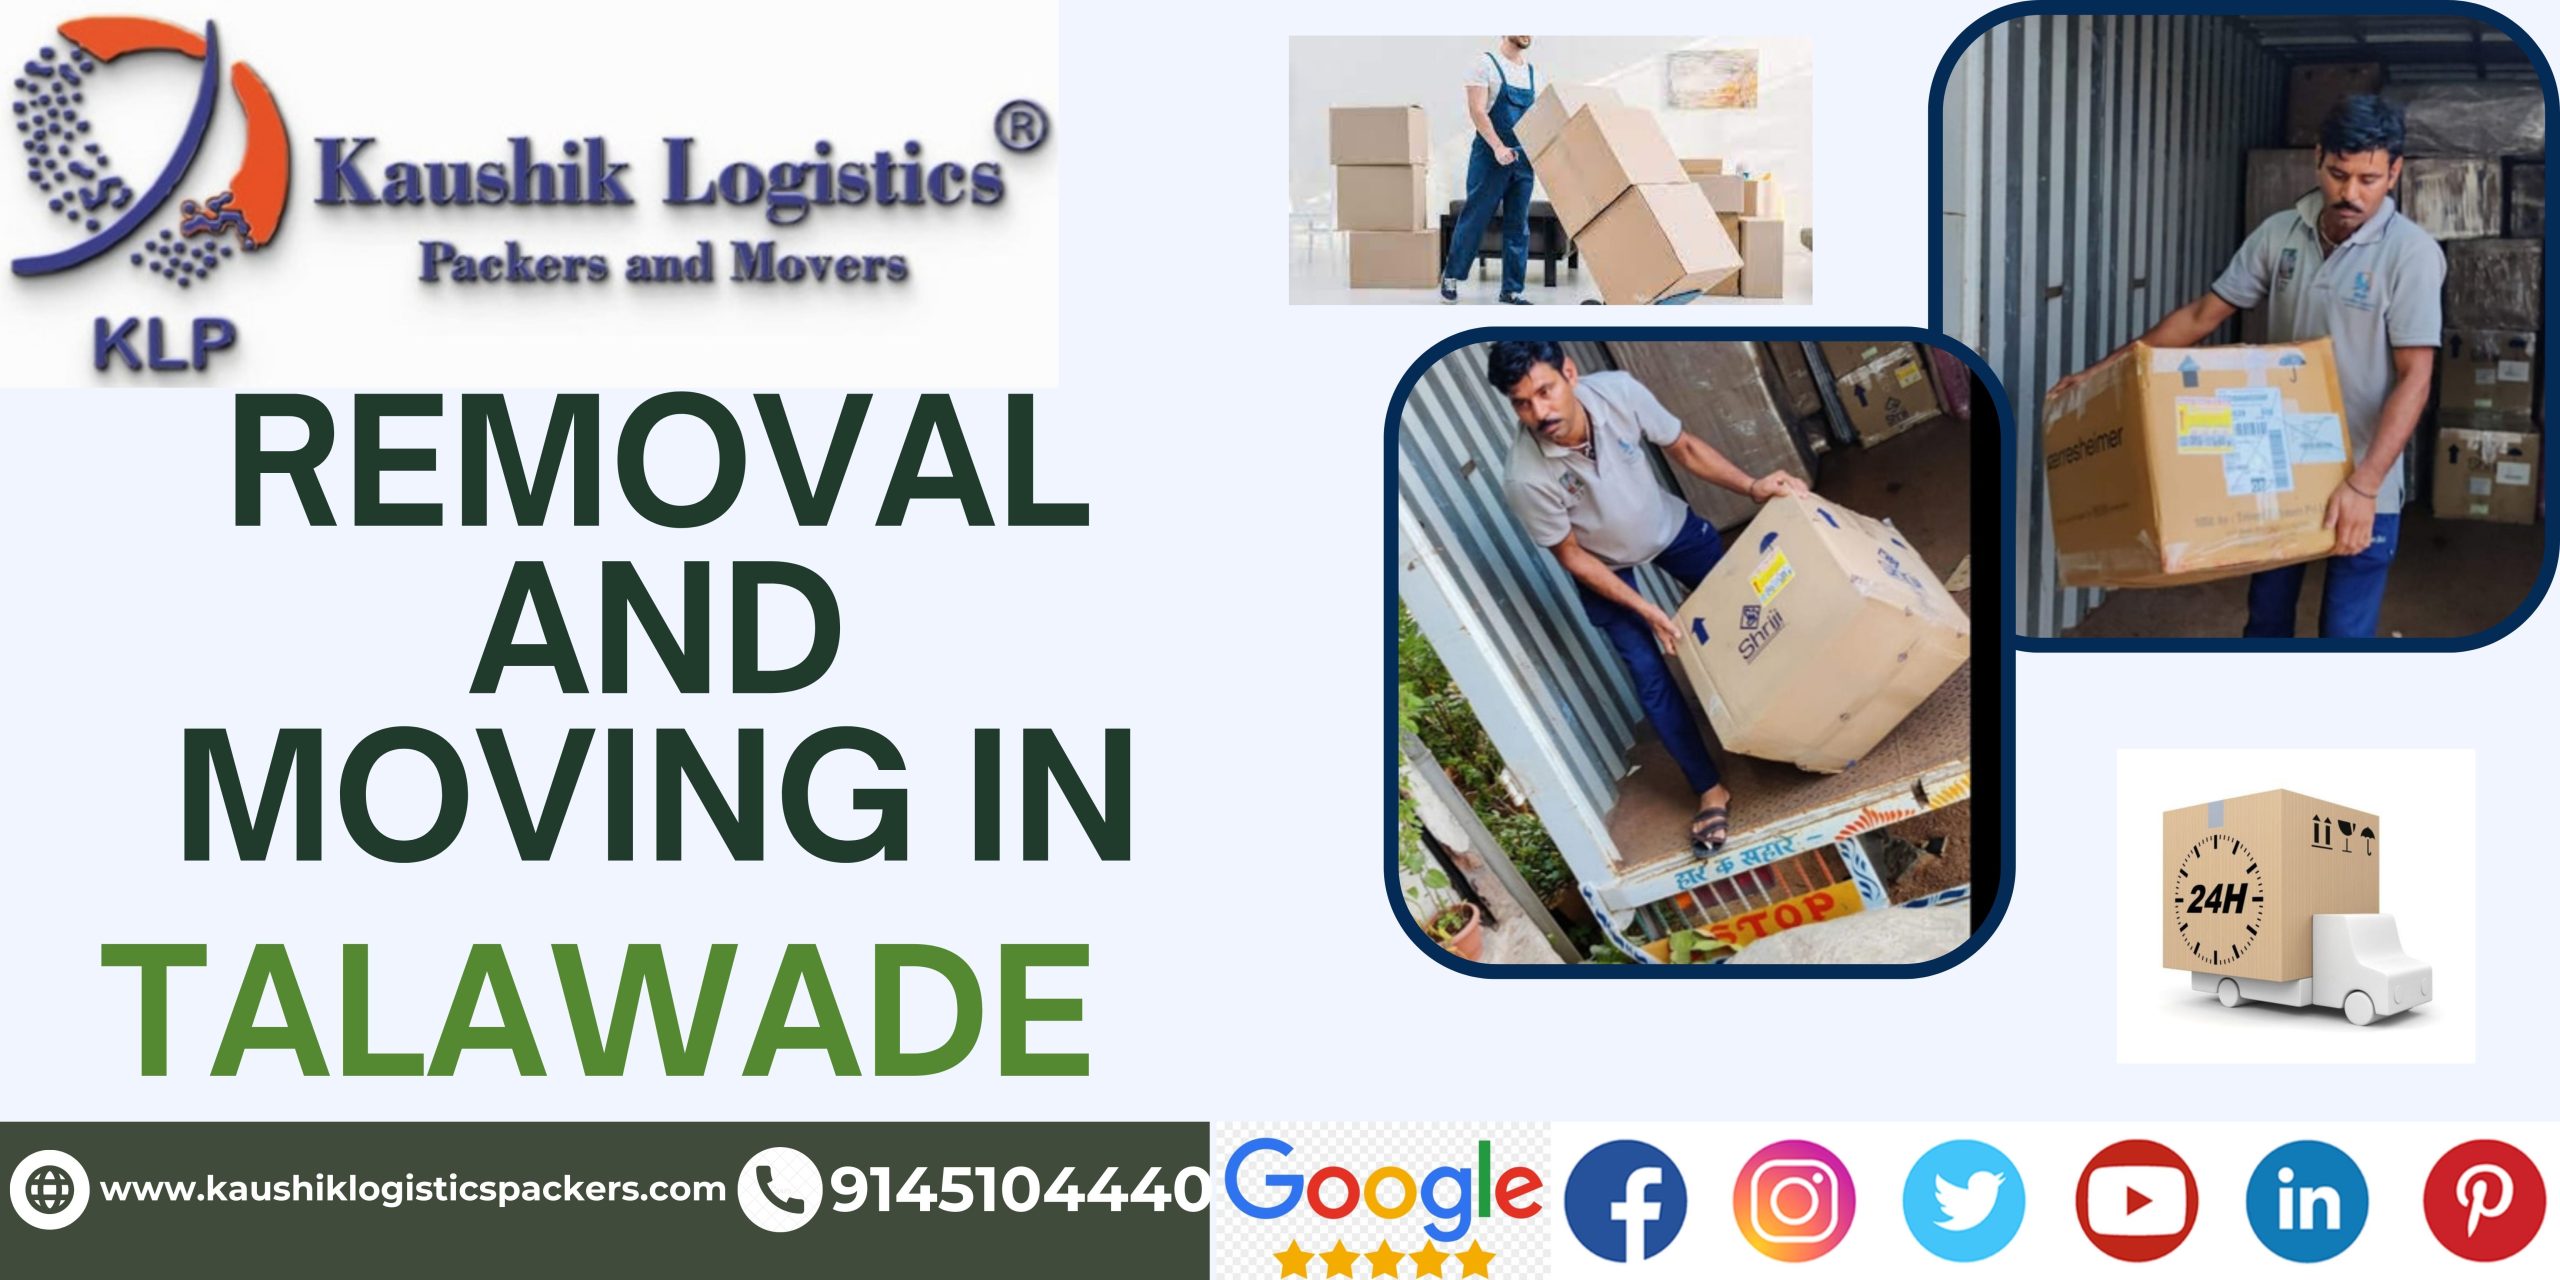 Packers and Movers In Talawade